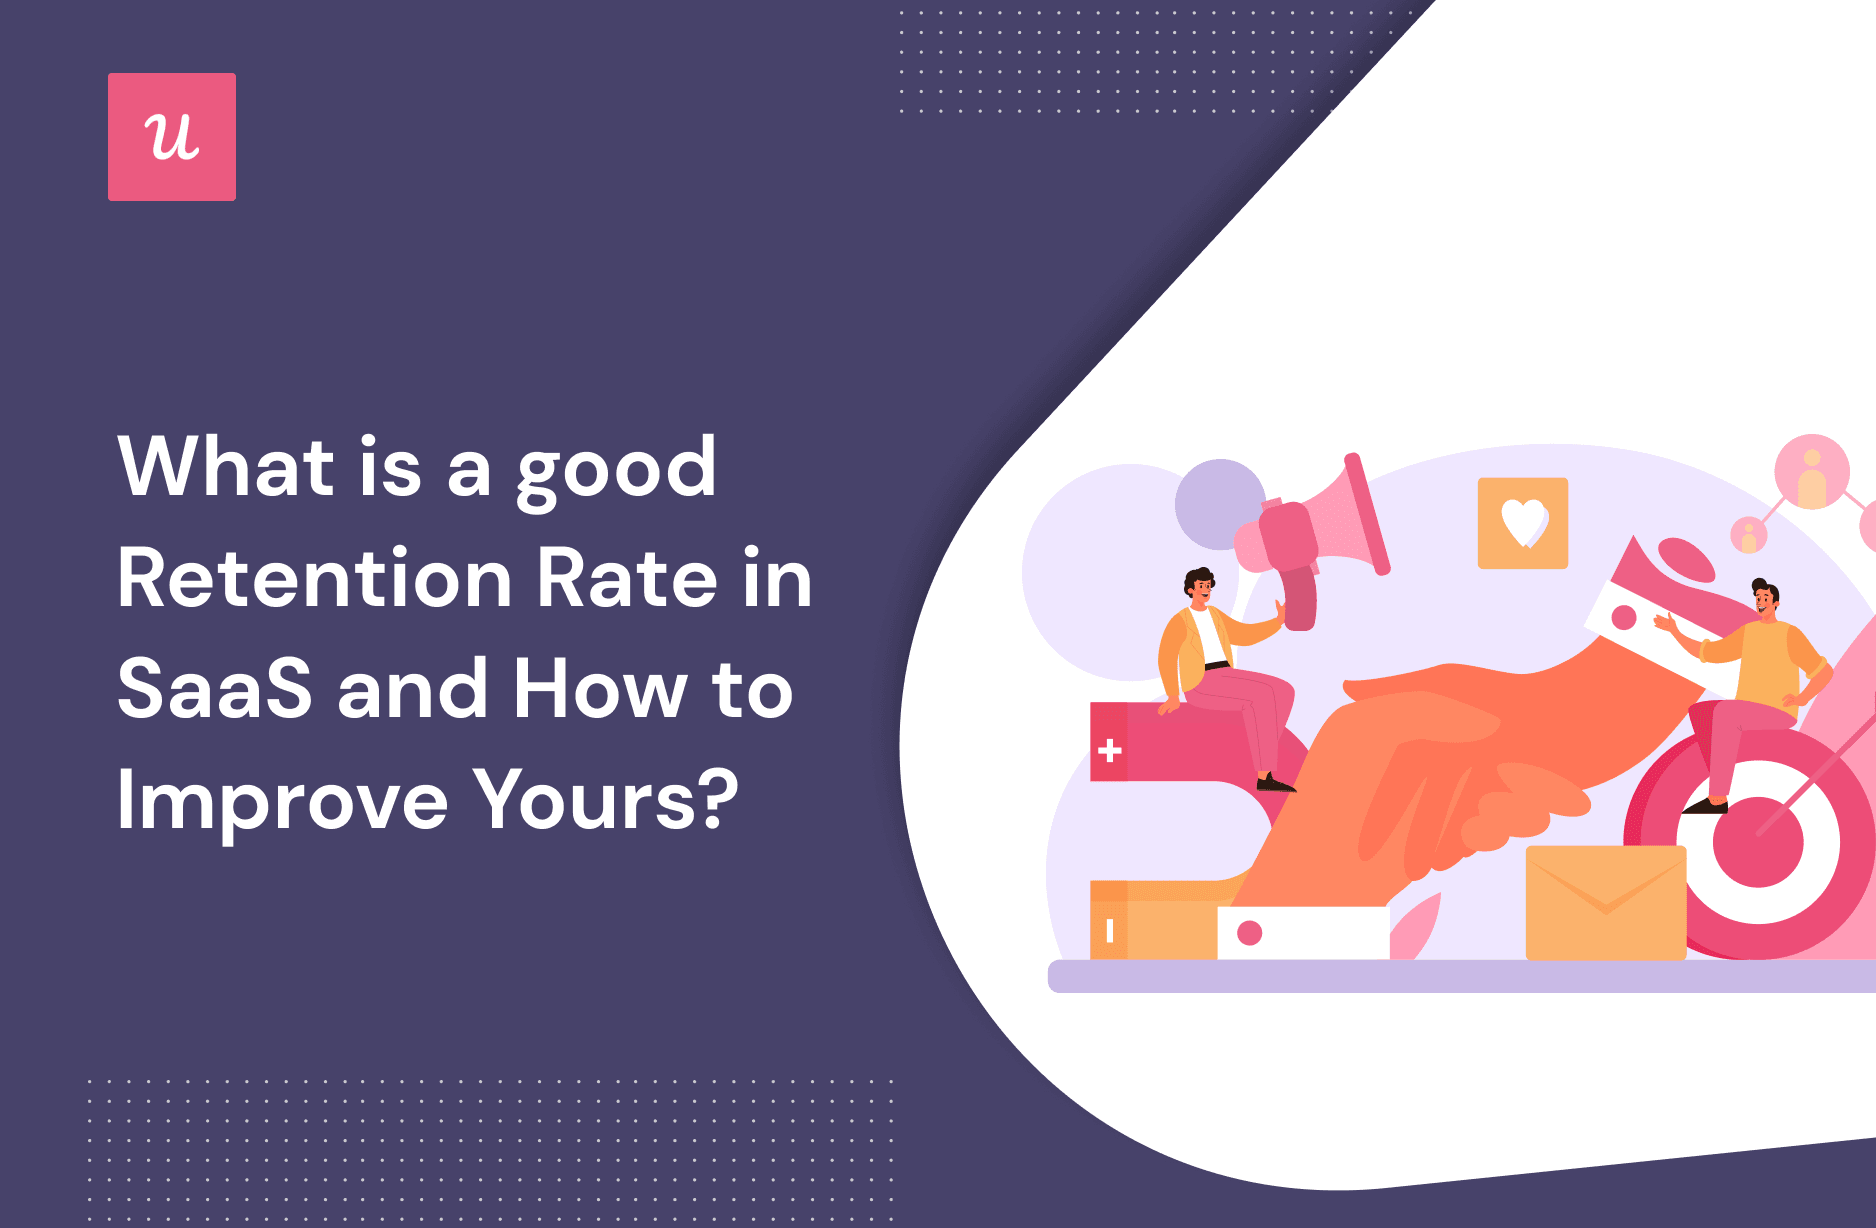 What is a good retention rate in SaaS and how to improve yours?